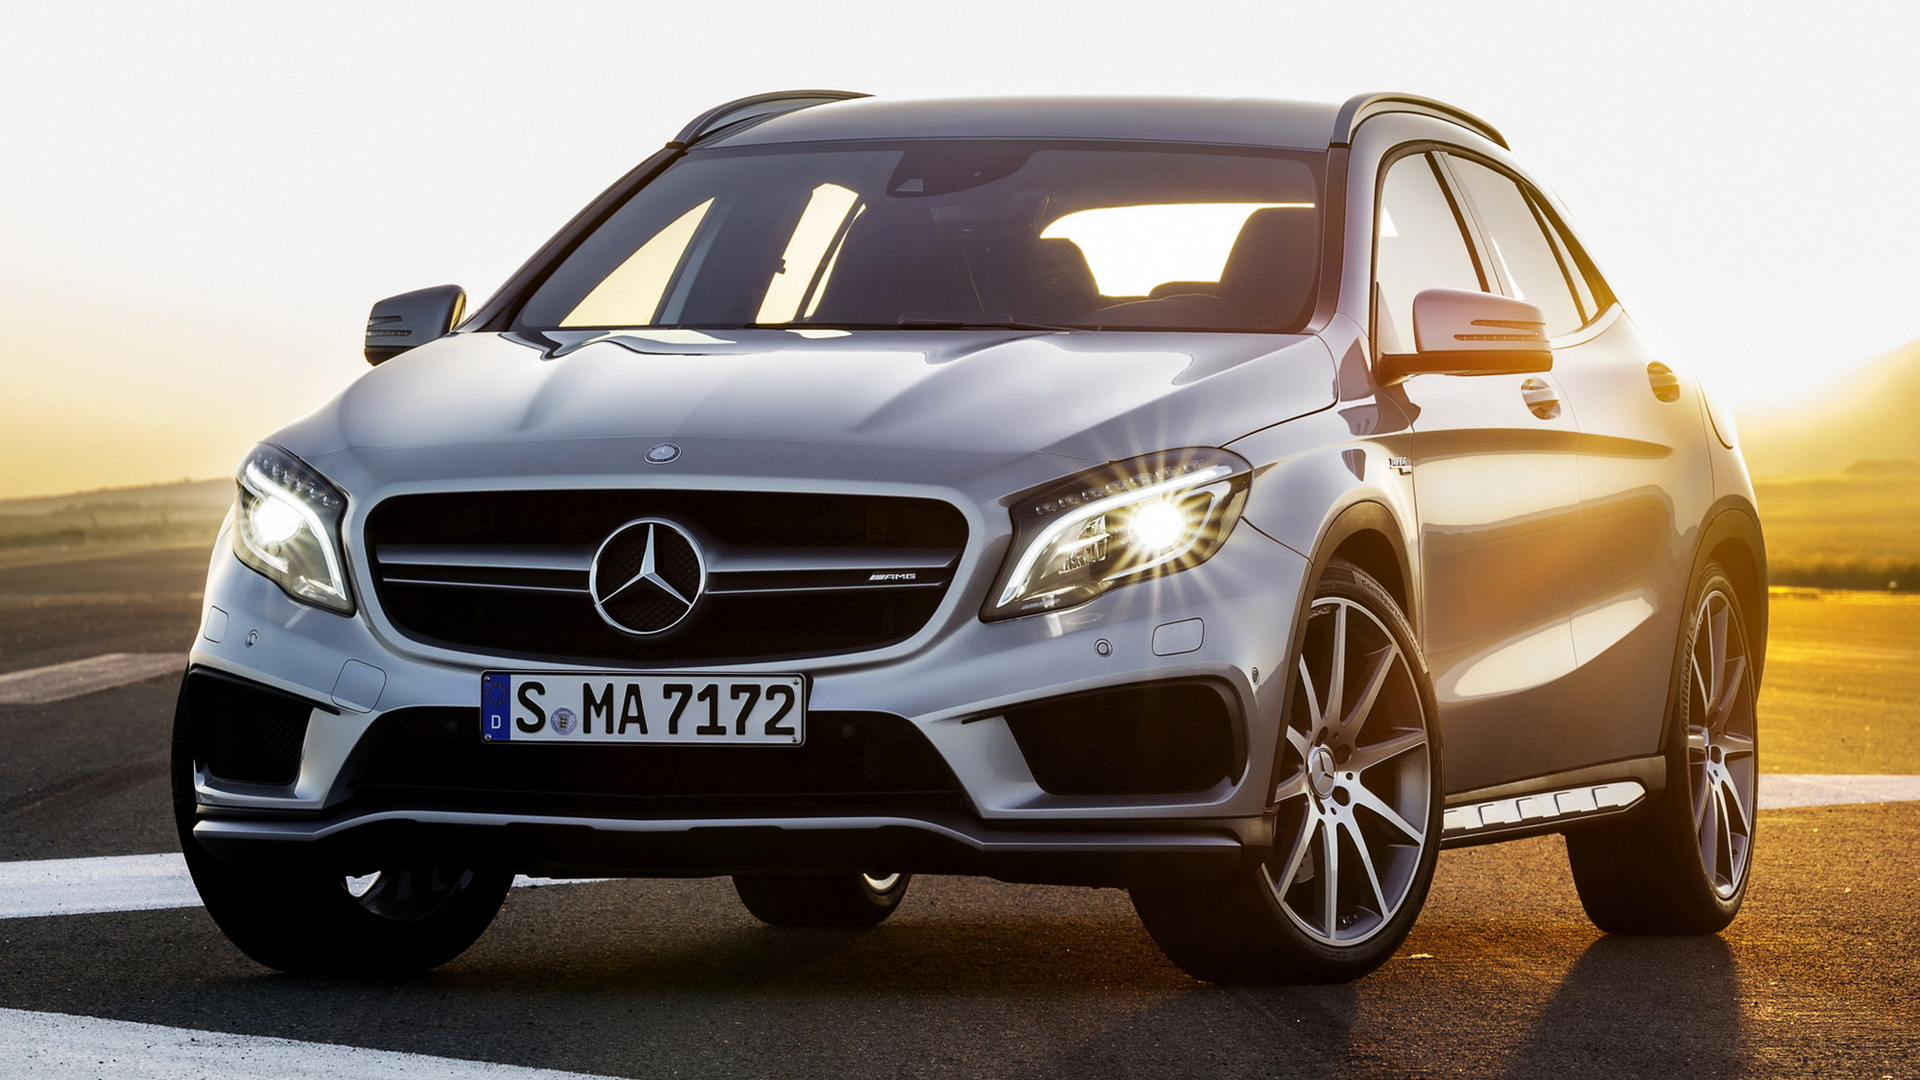 Mercedes-Benz GLA 45 AMG 4Matic (2014) Wallpapers and HD Images